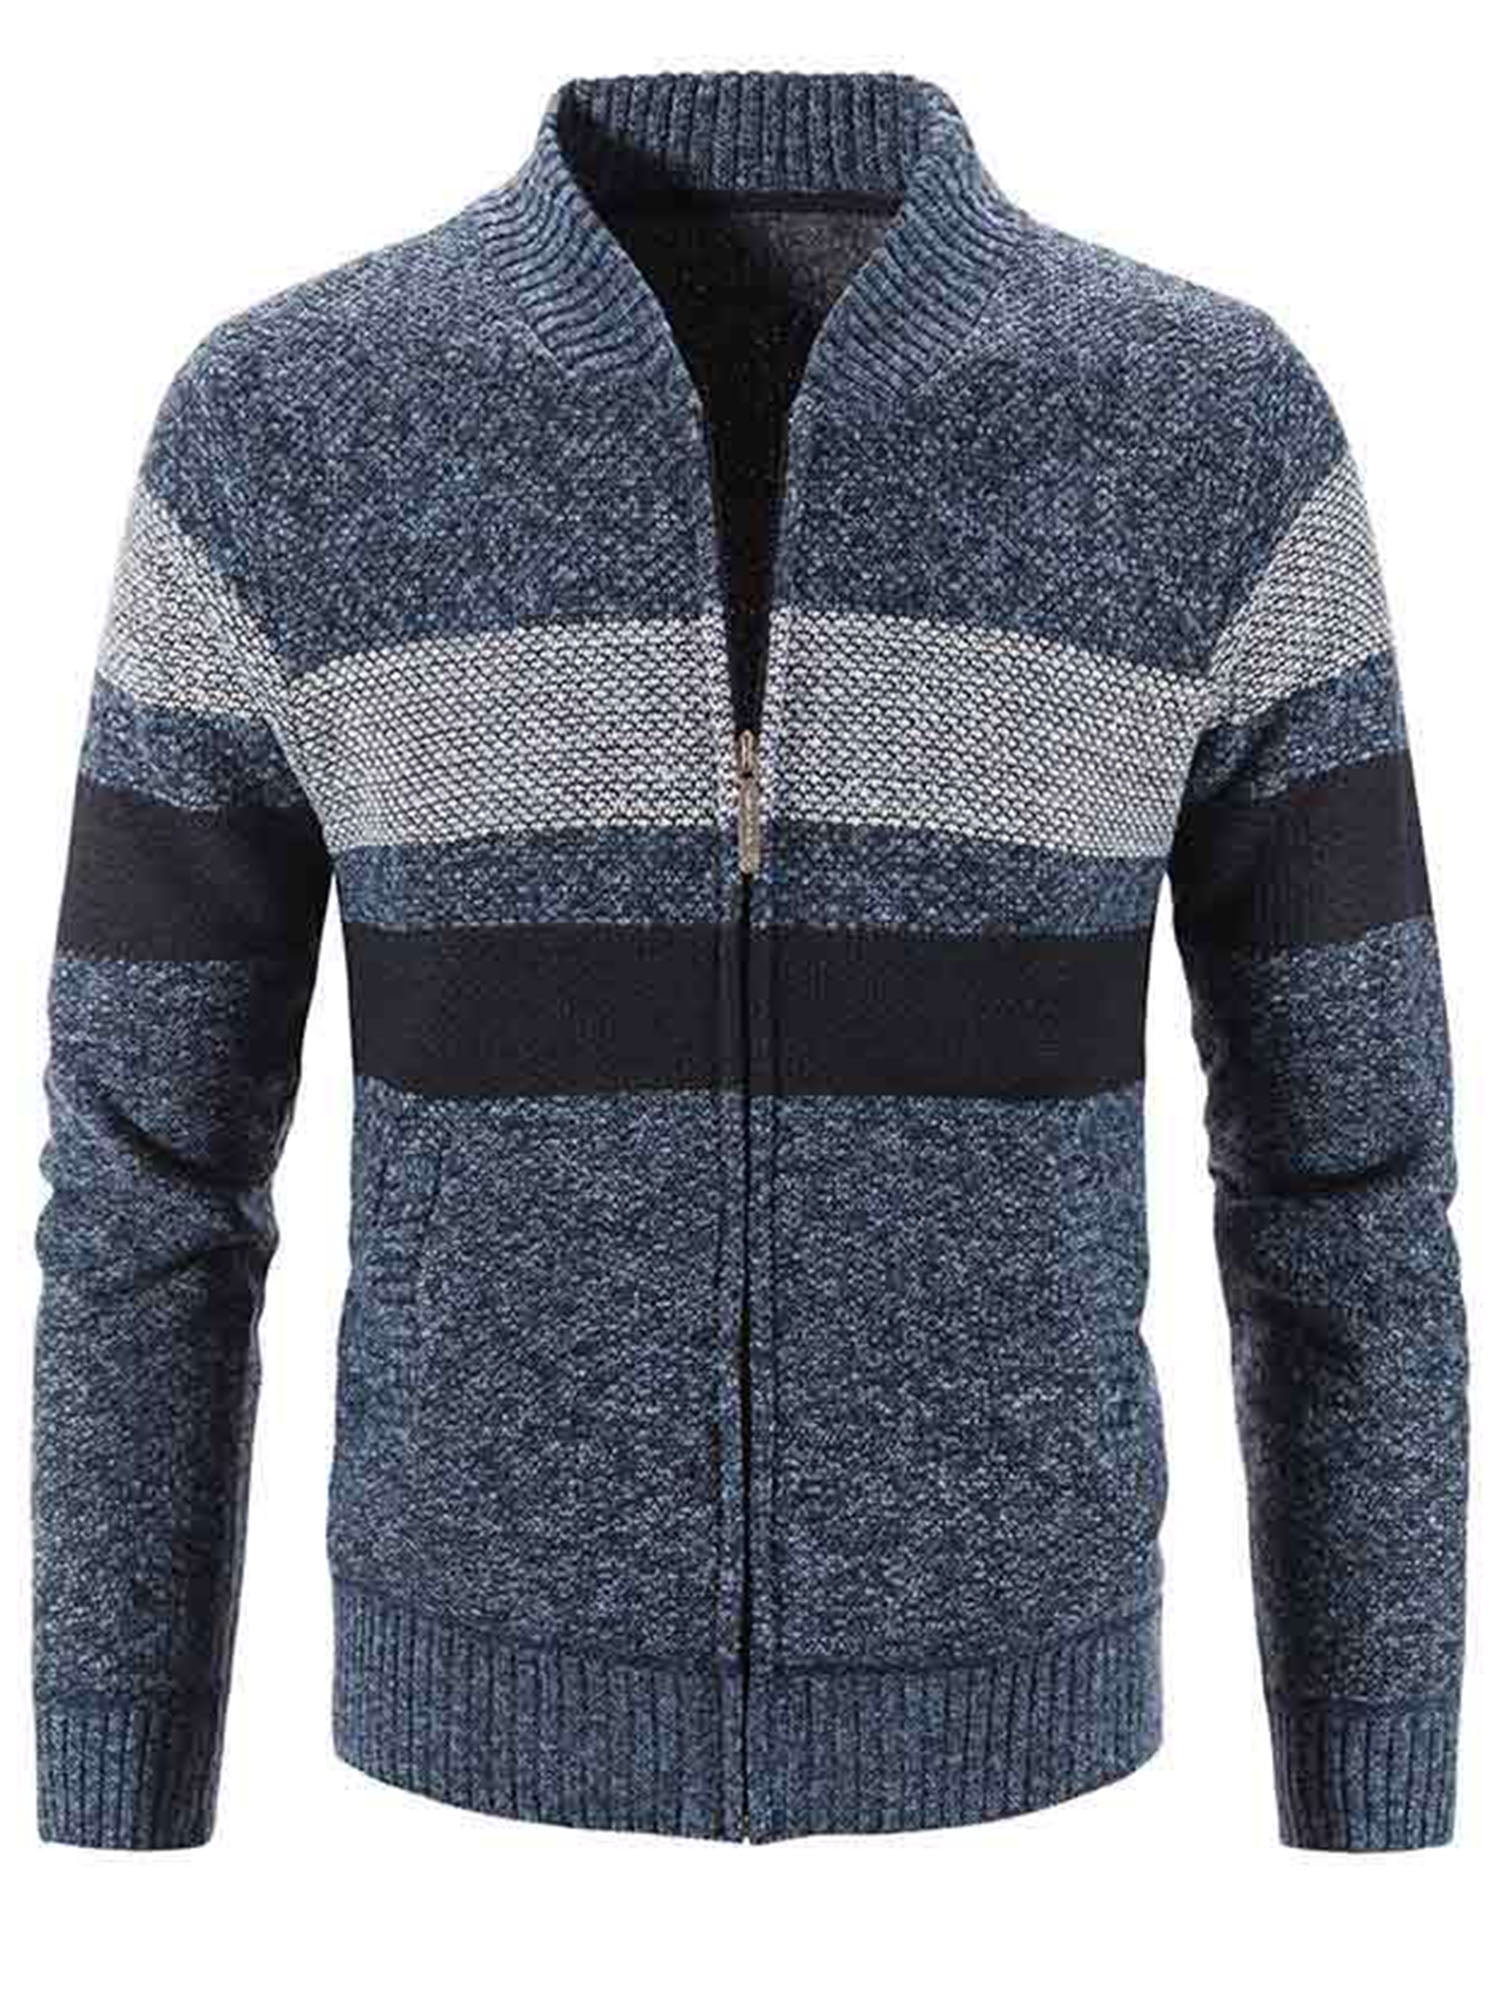 Frontwalk Knitted Sweaters Mens Casual Winter Thick Knitwear Coat Full ...